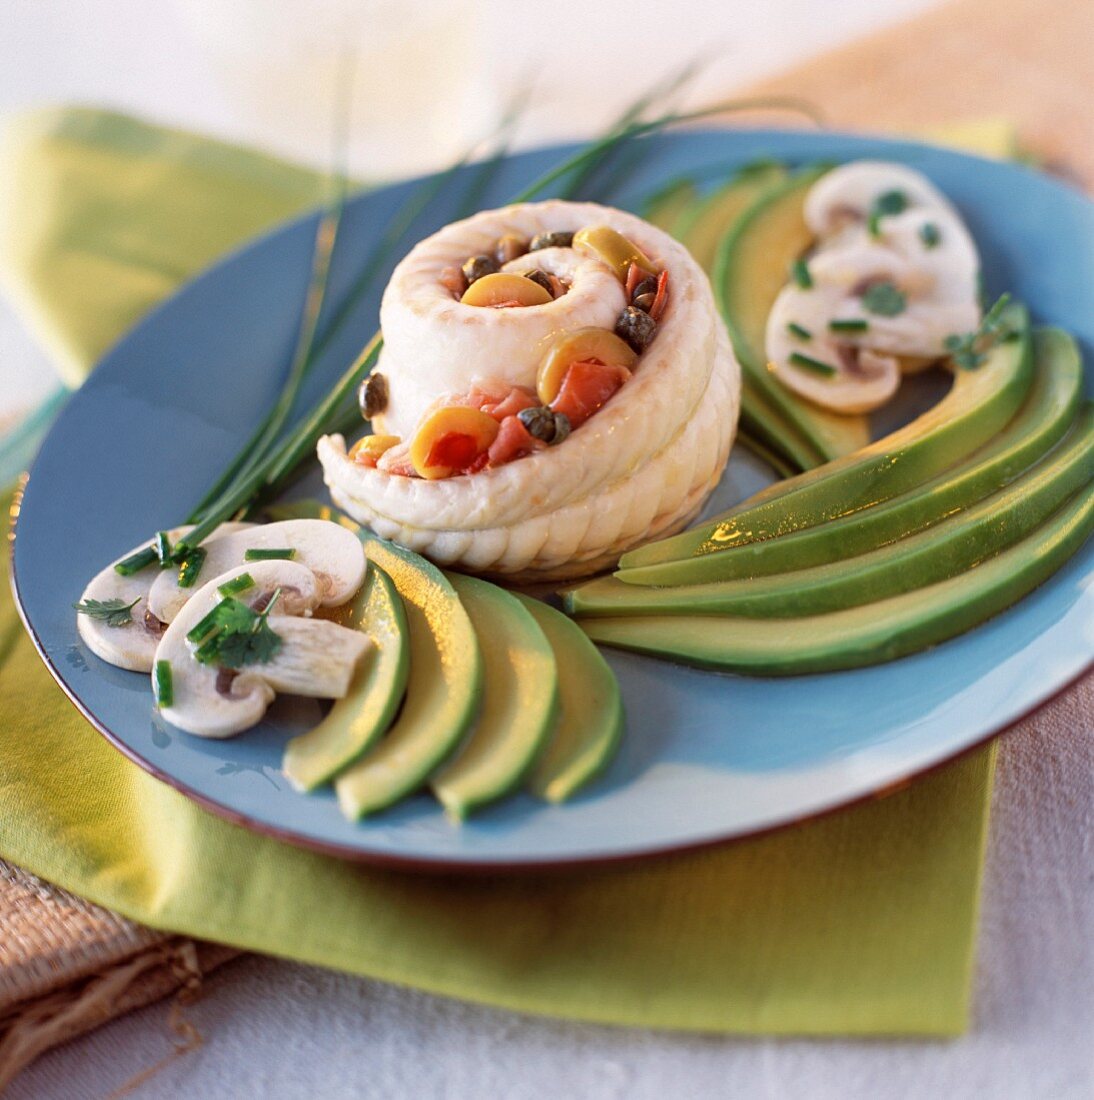 Rolled sole with avocado